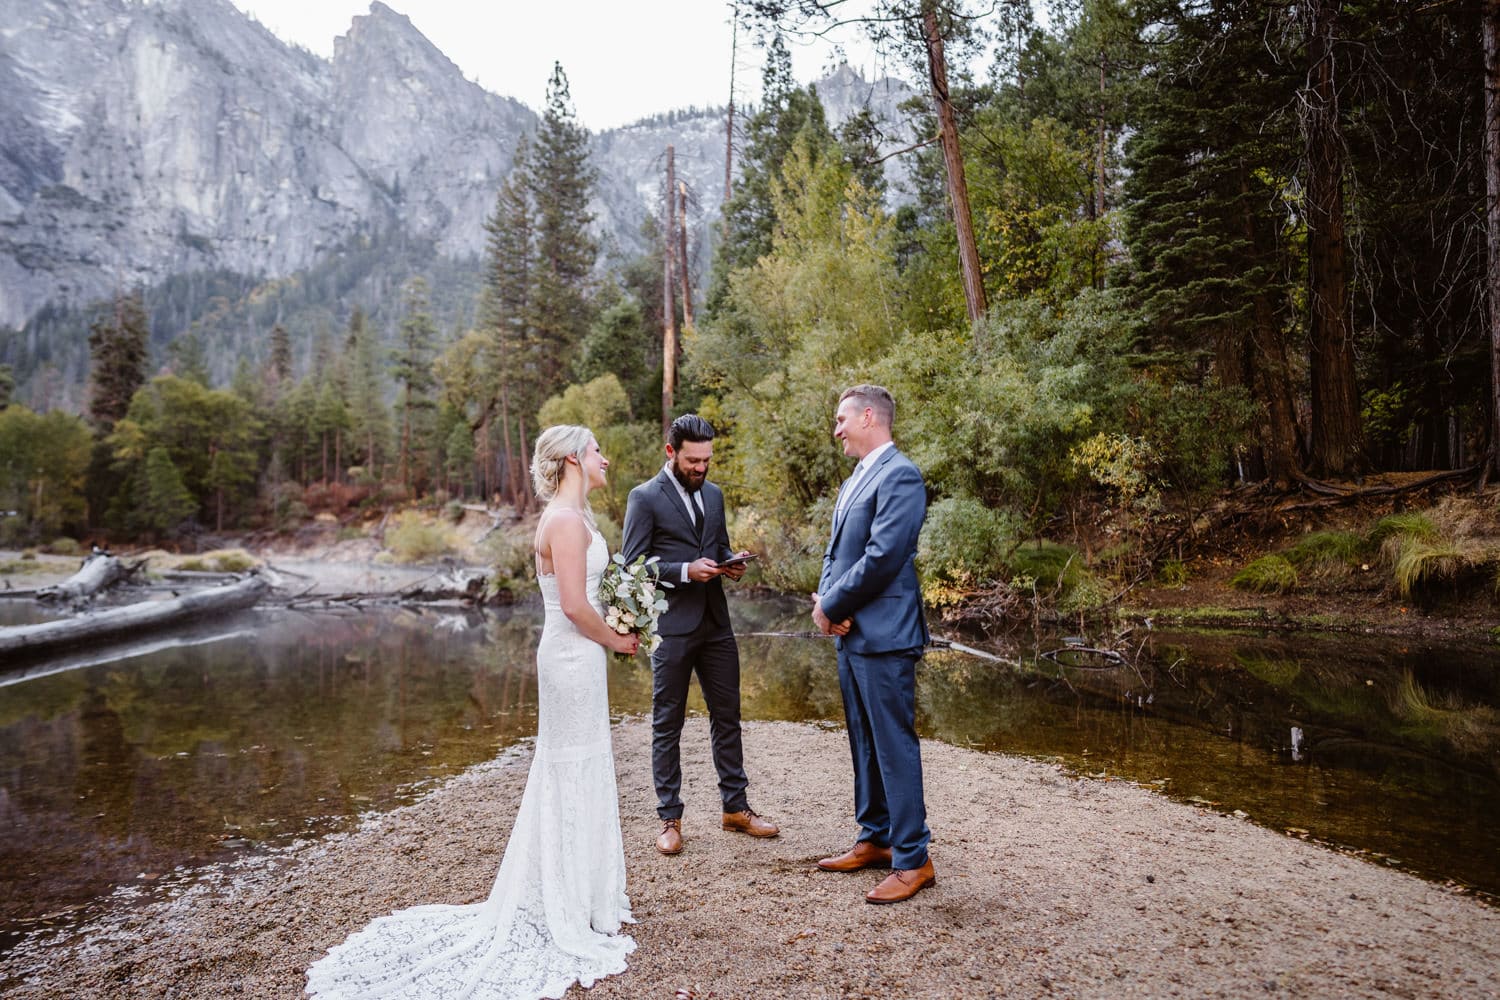 A friend officiating a couples elopement in Yosemite.